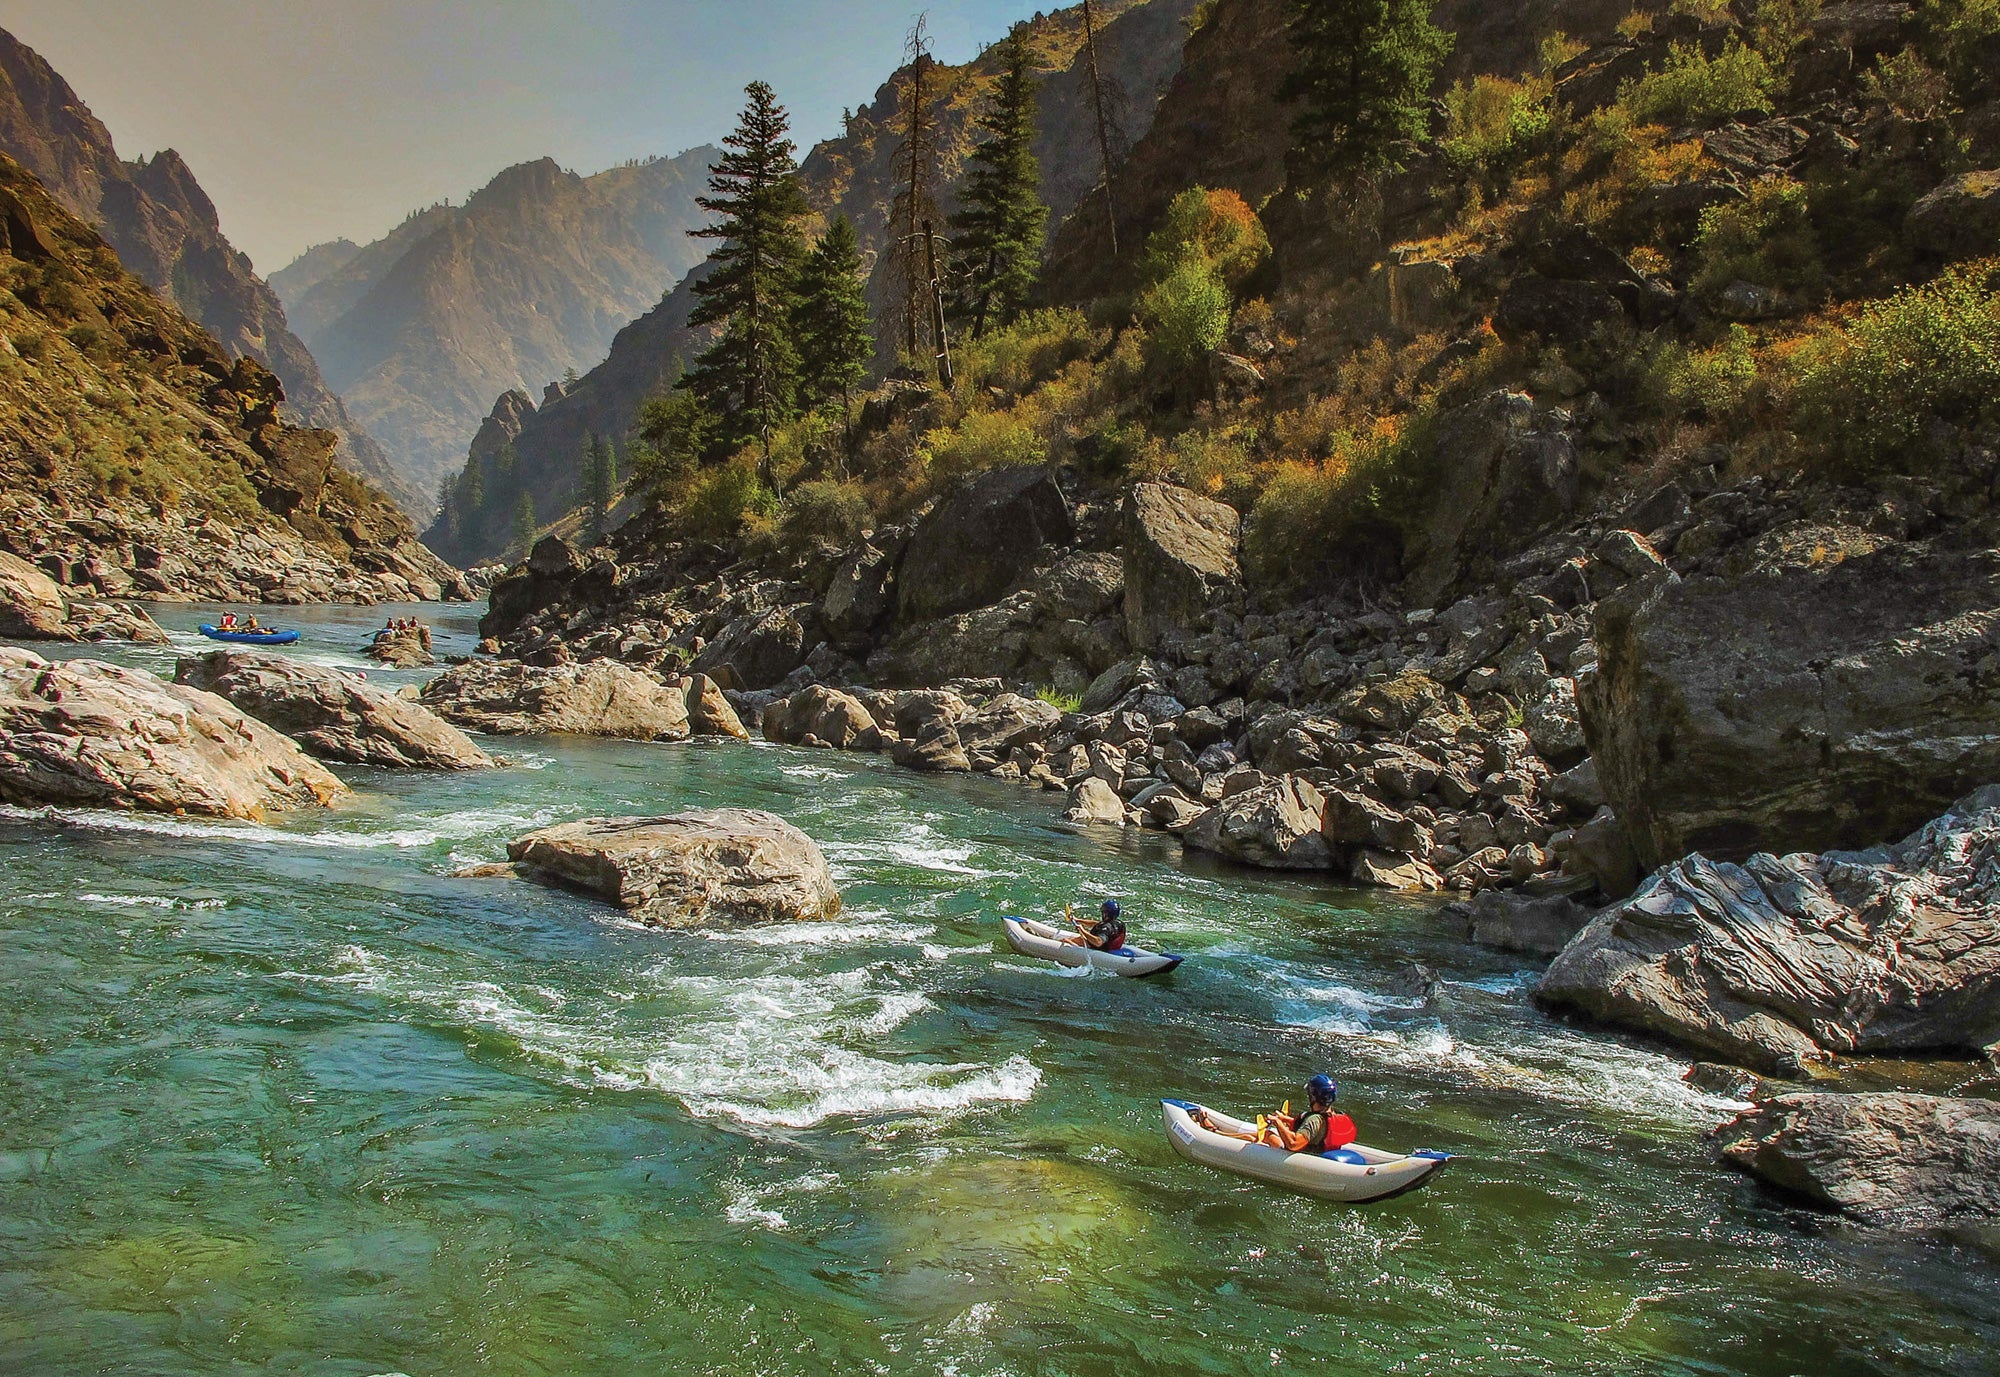 The 11 Best River Trips in America